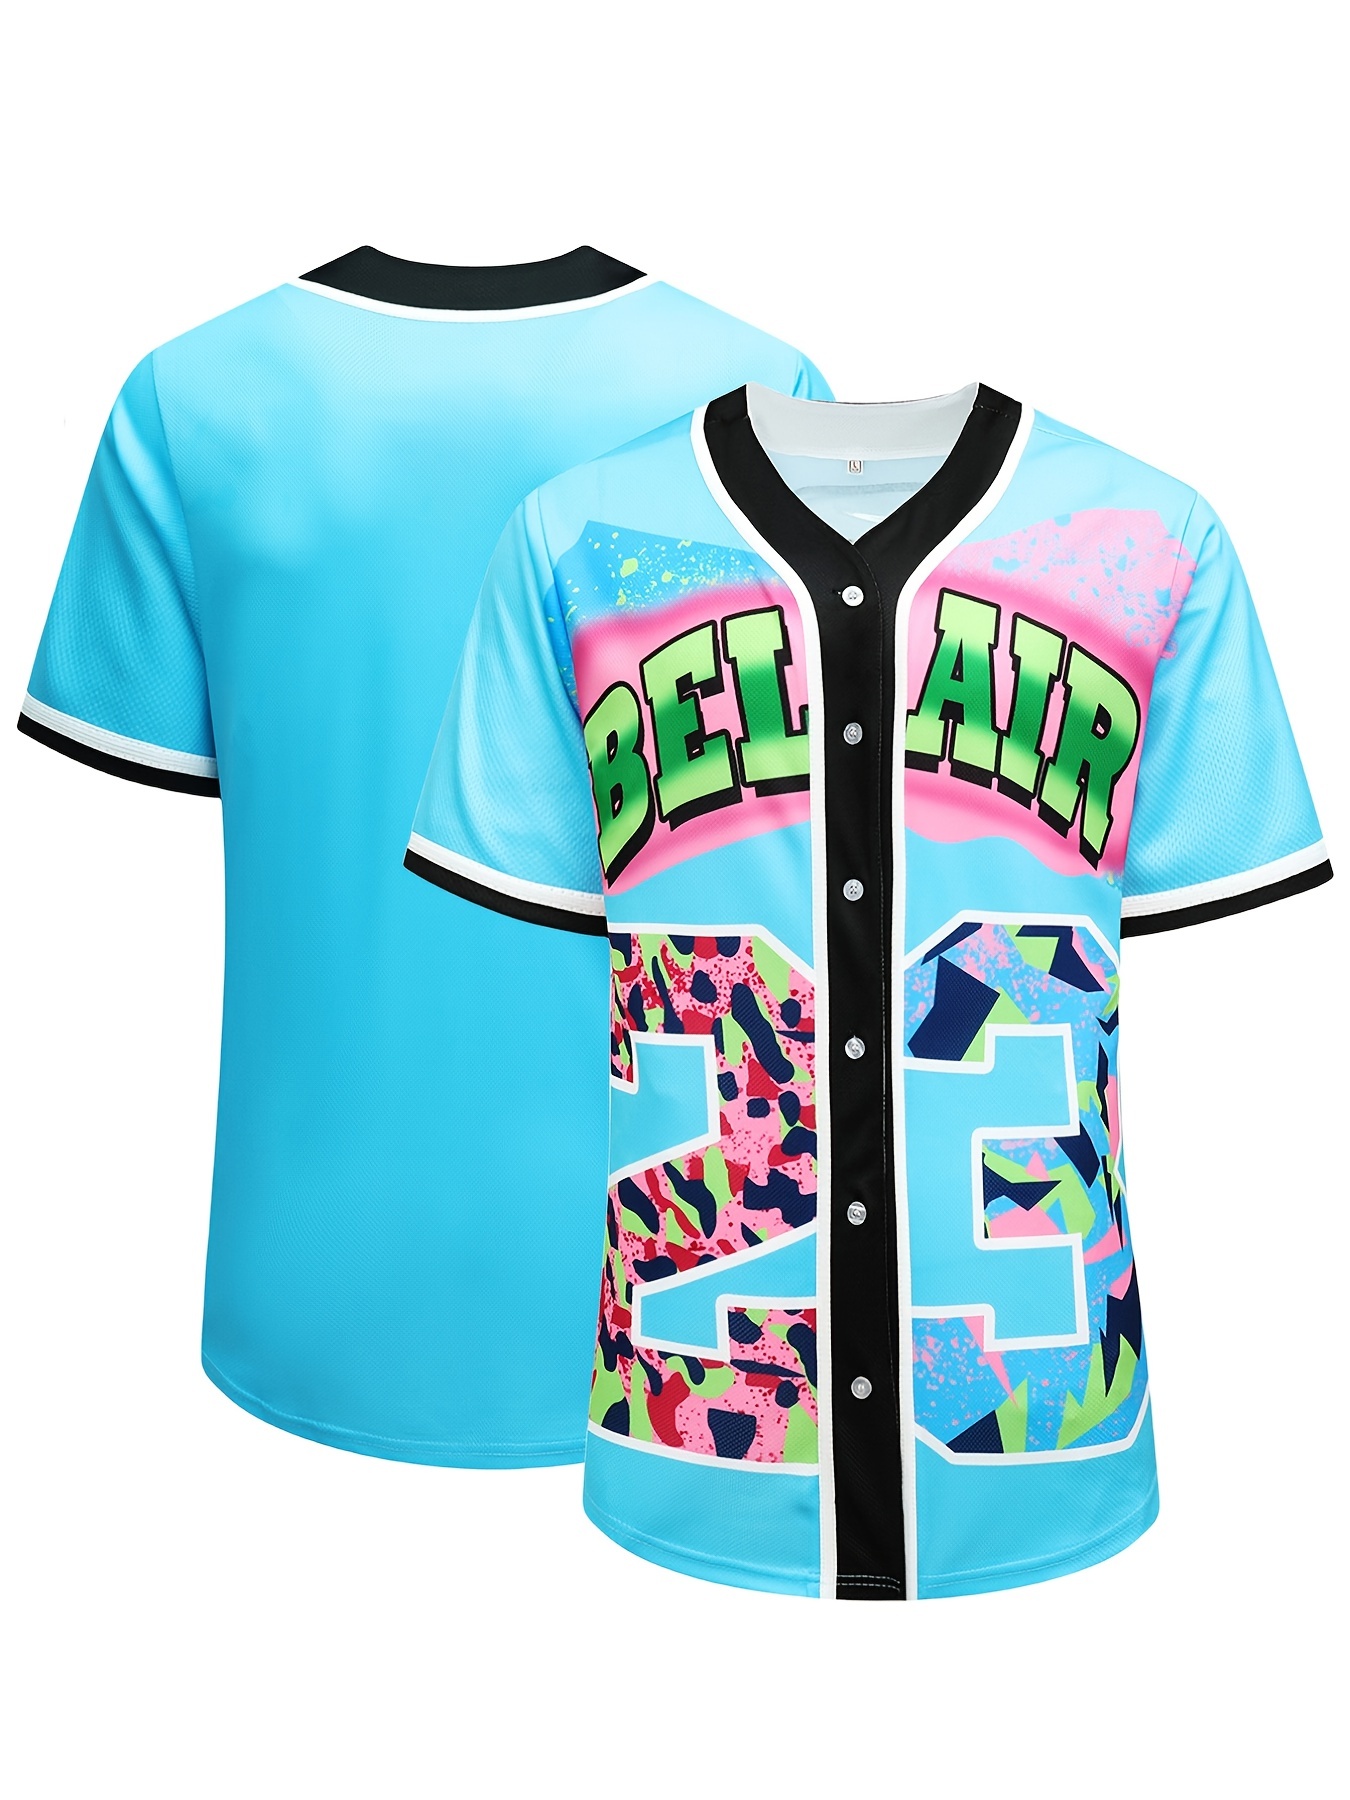 Buy Bel Air 23 Clothing for Men Women, 90s Theme Party Hip Hop Baseball  Jersey Short Sleeves Top Fashion Shirt for Unisex, Style 14, Large at